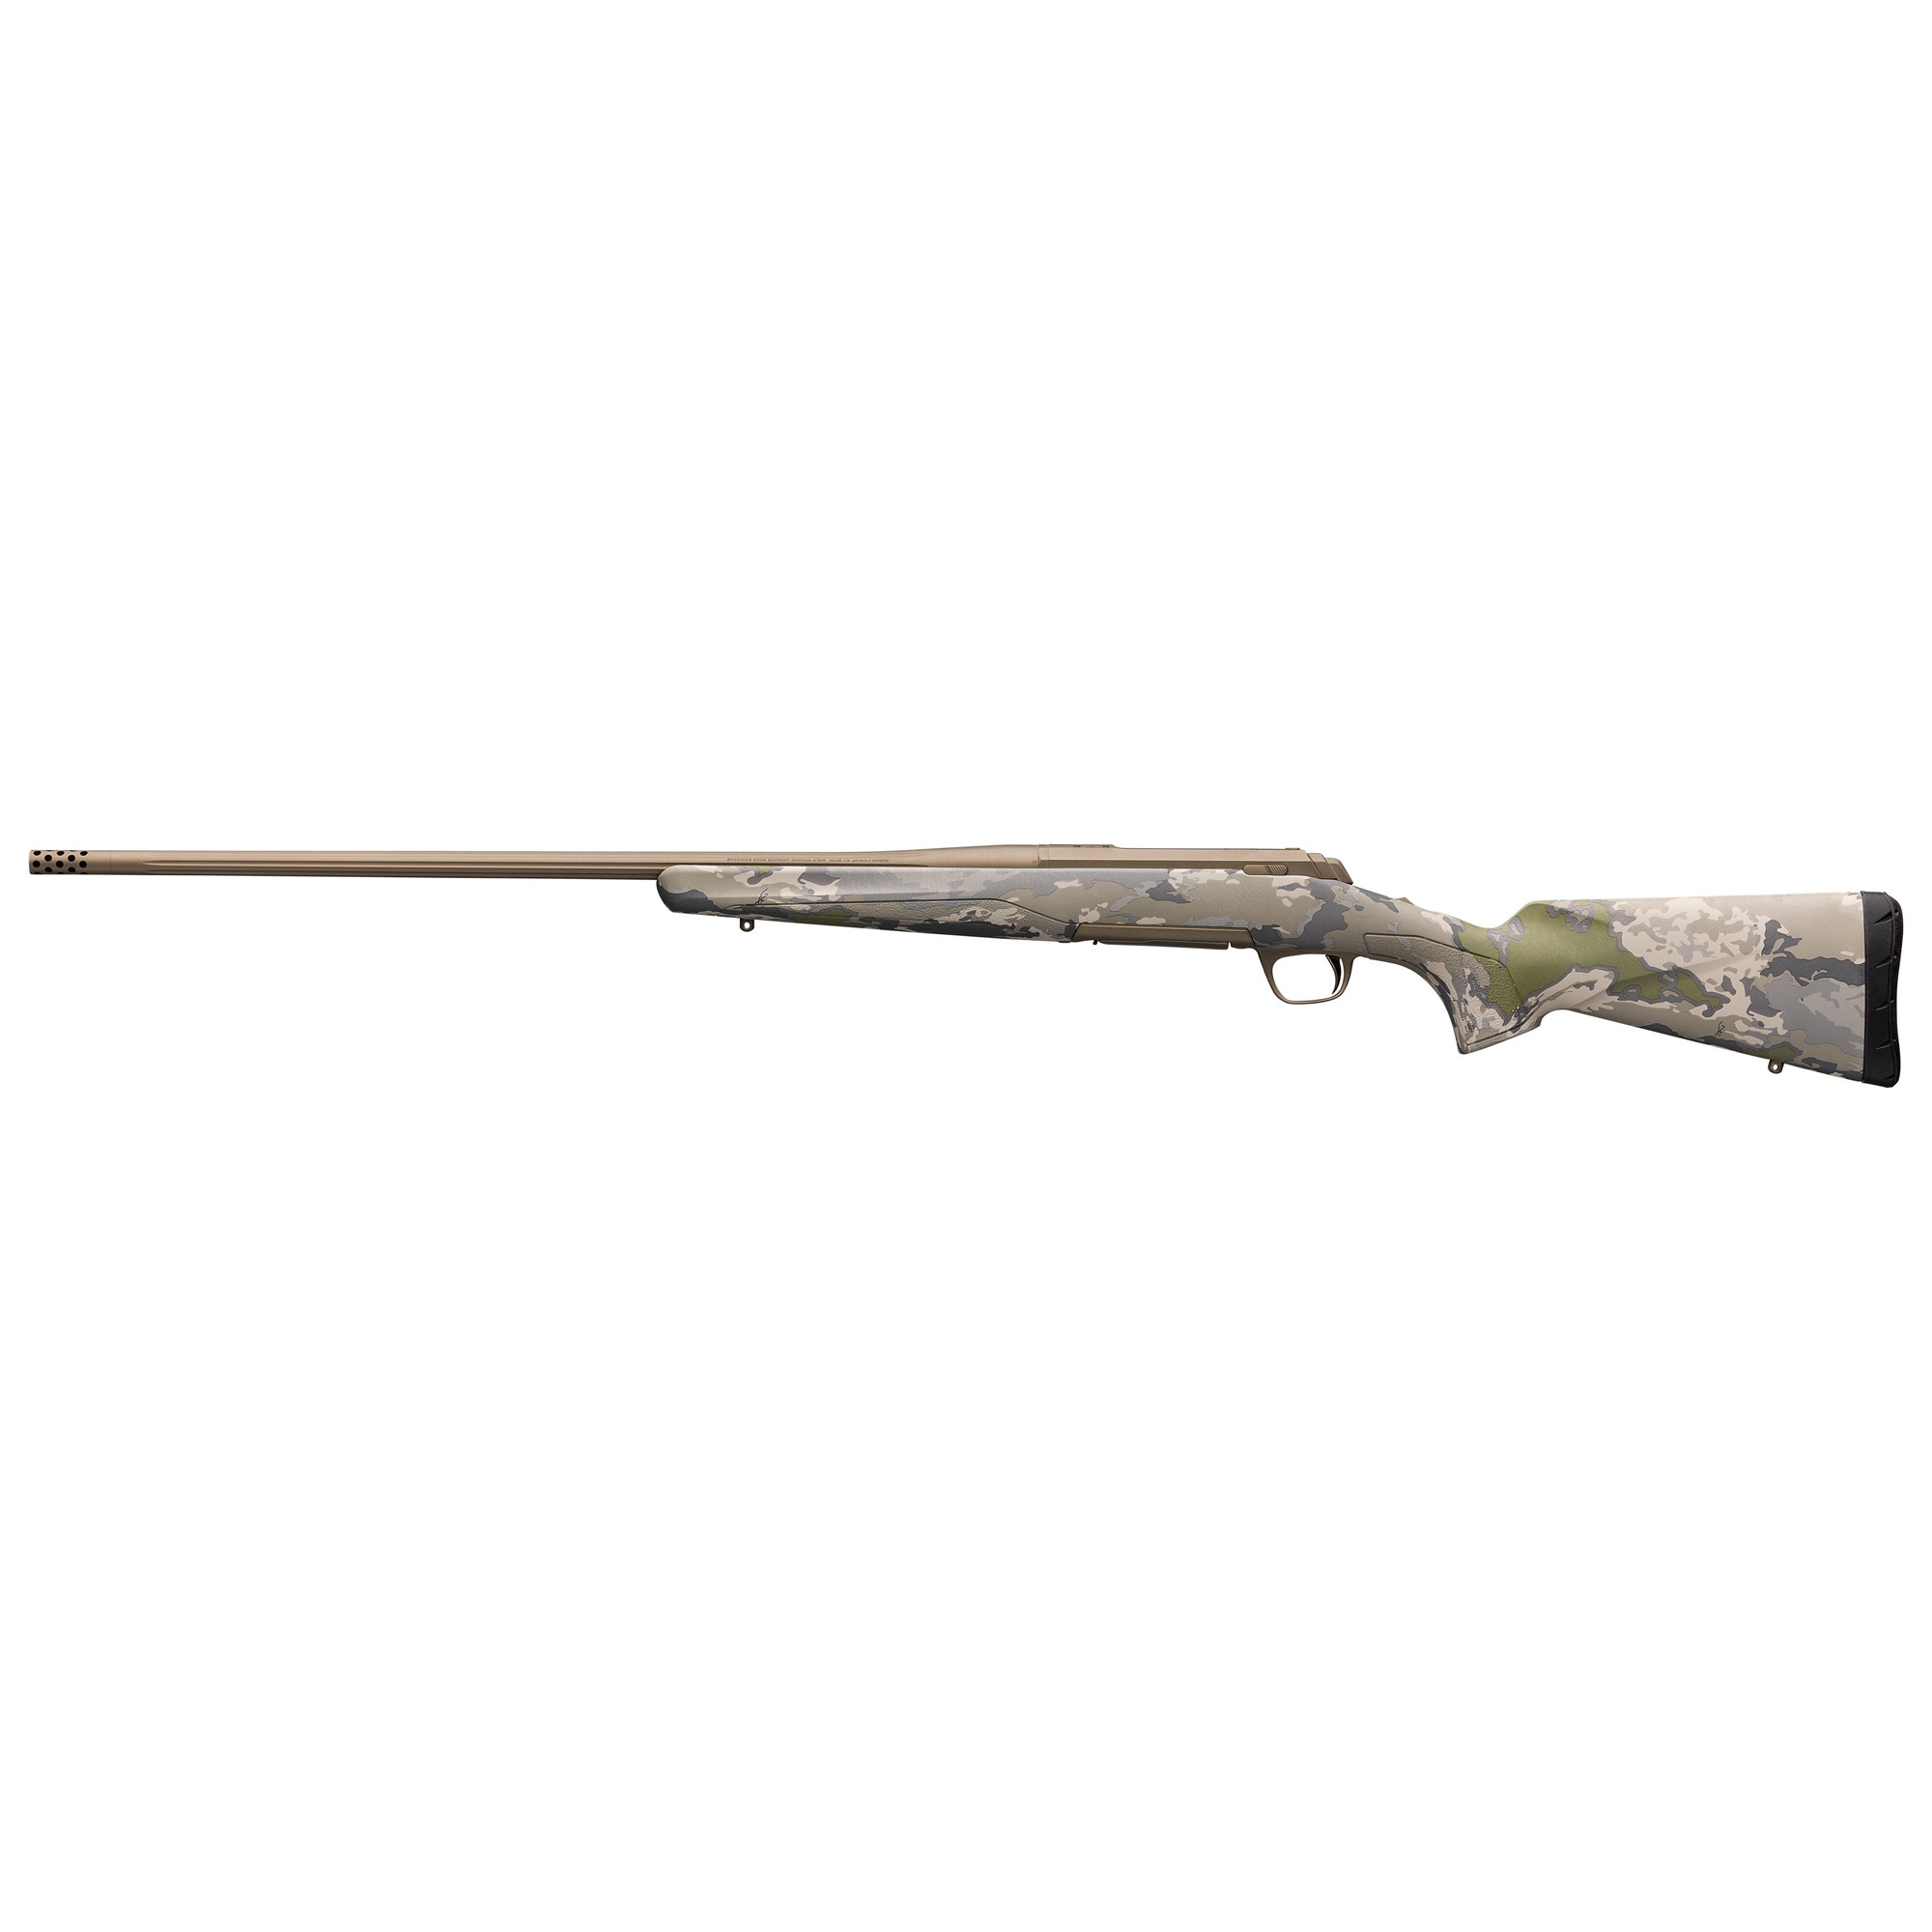 BROWNING XBLT SPEED 7MM 26 3RD OVIX